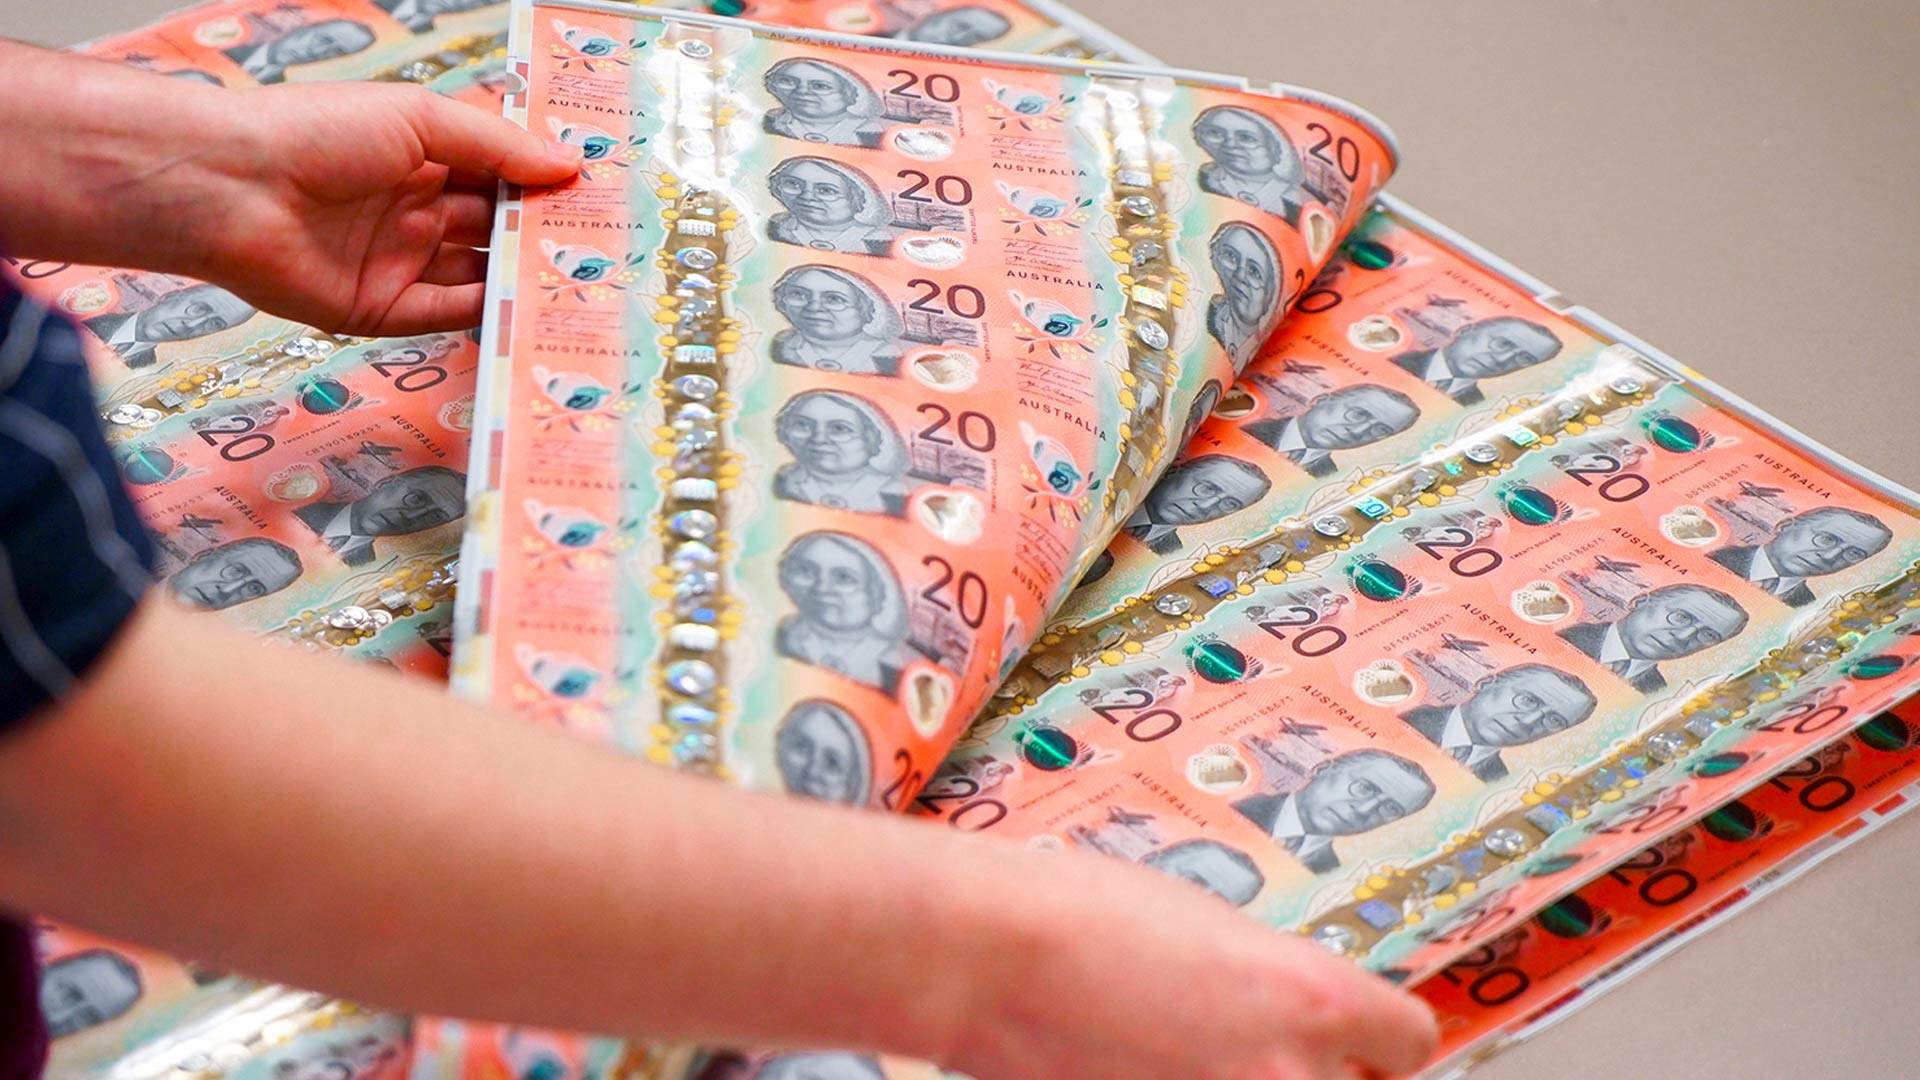 Australia's Shiny New $20 Notes Are on Their Way to Your Wallet